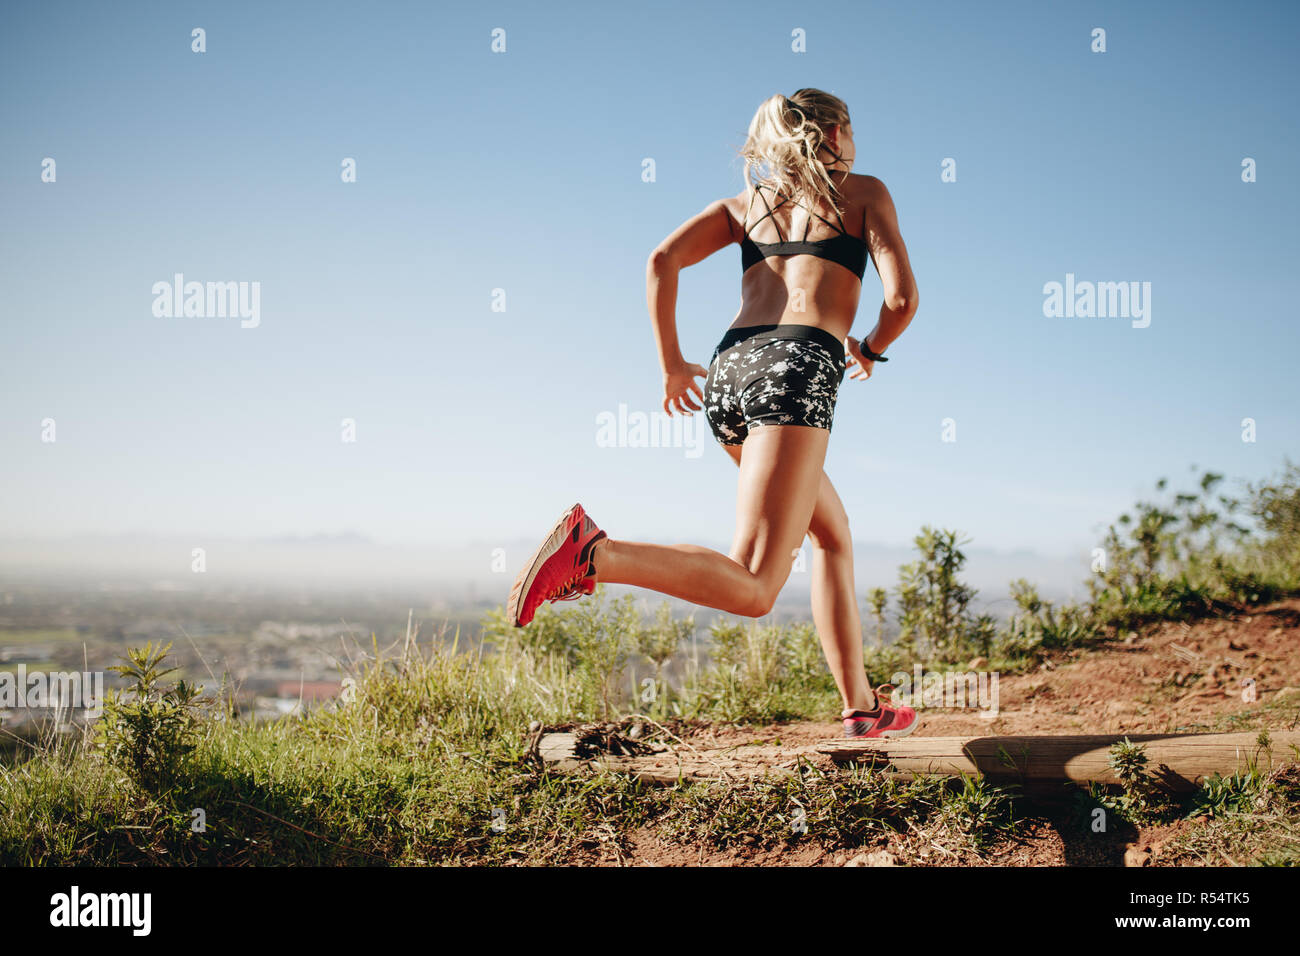 Rear view of a woman in fitness wear sprinting. Female athlete training outdoors running on a sunny day. Stock Photo